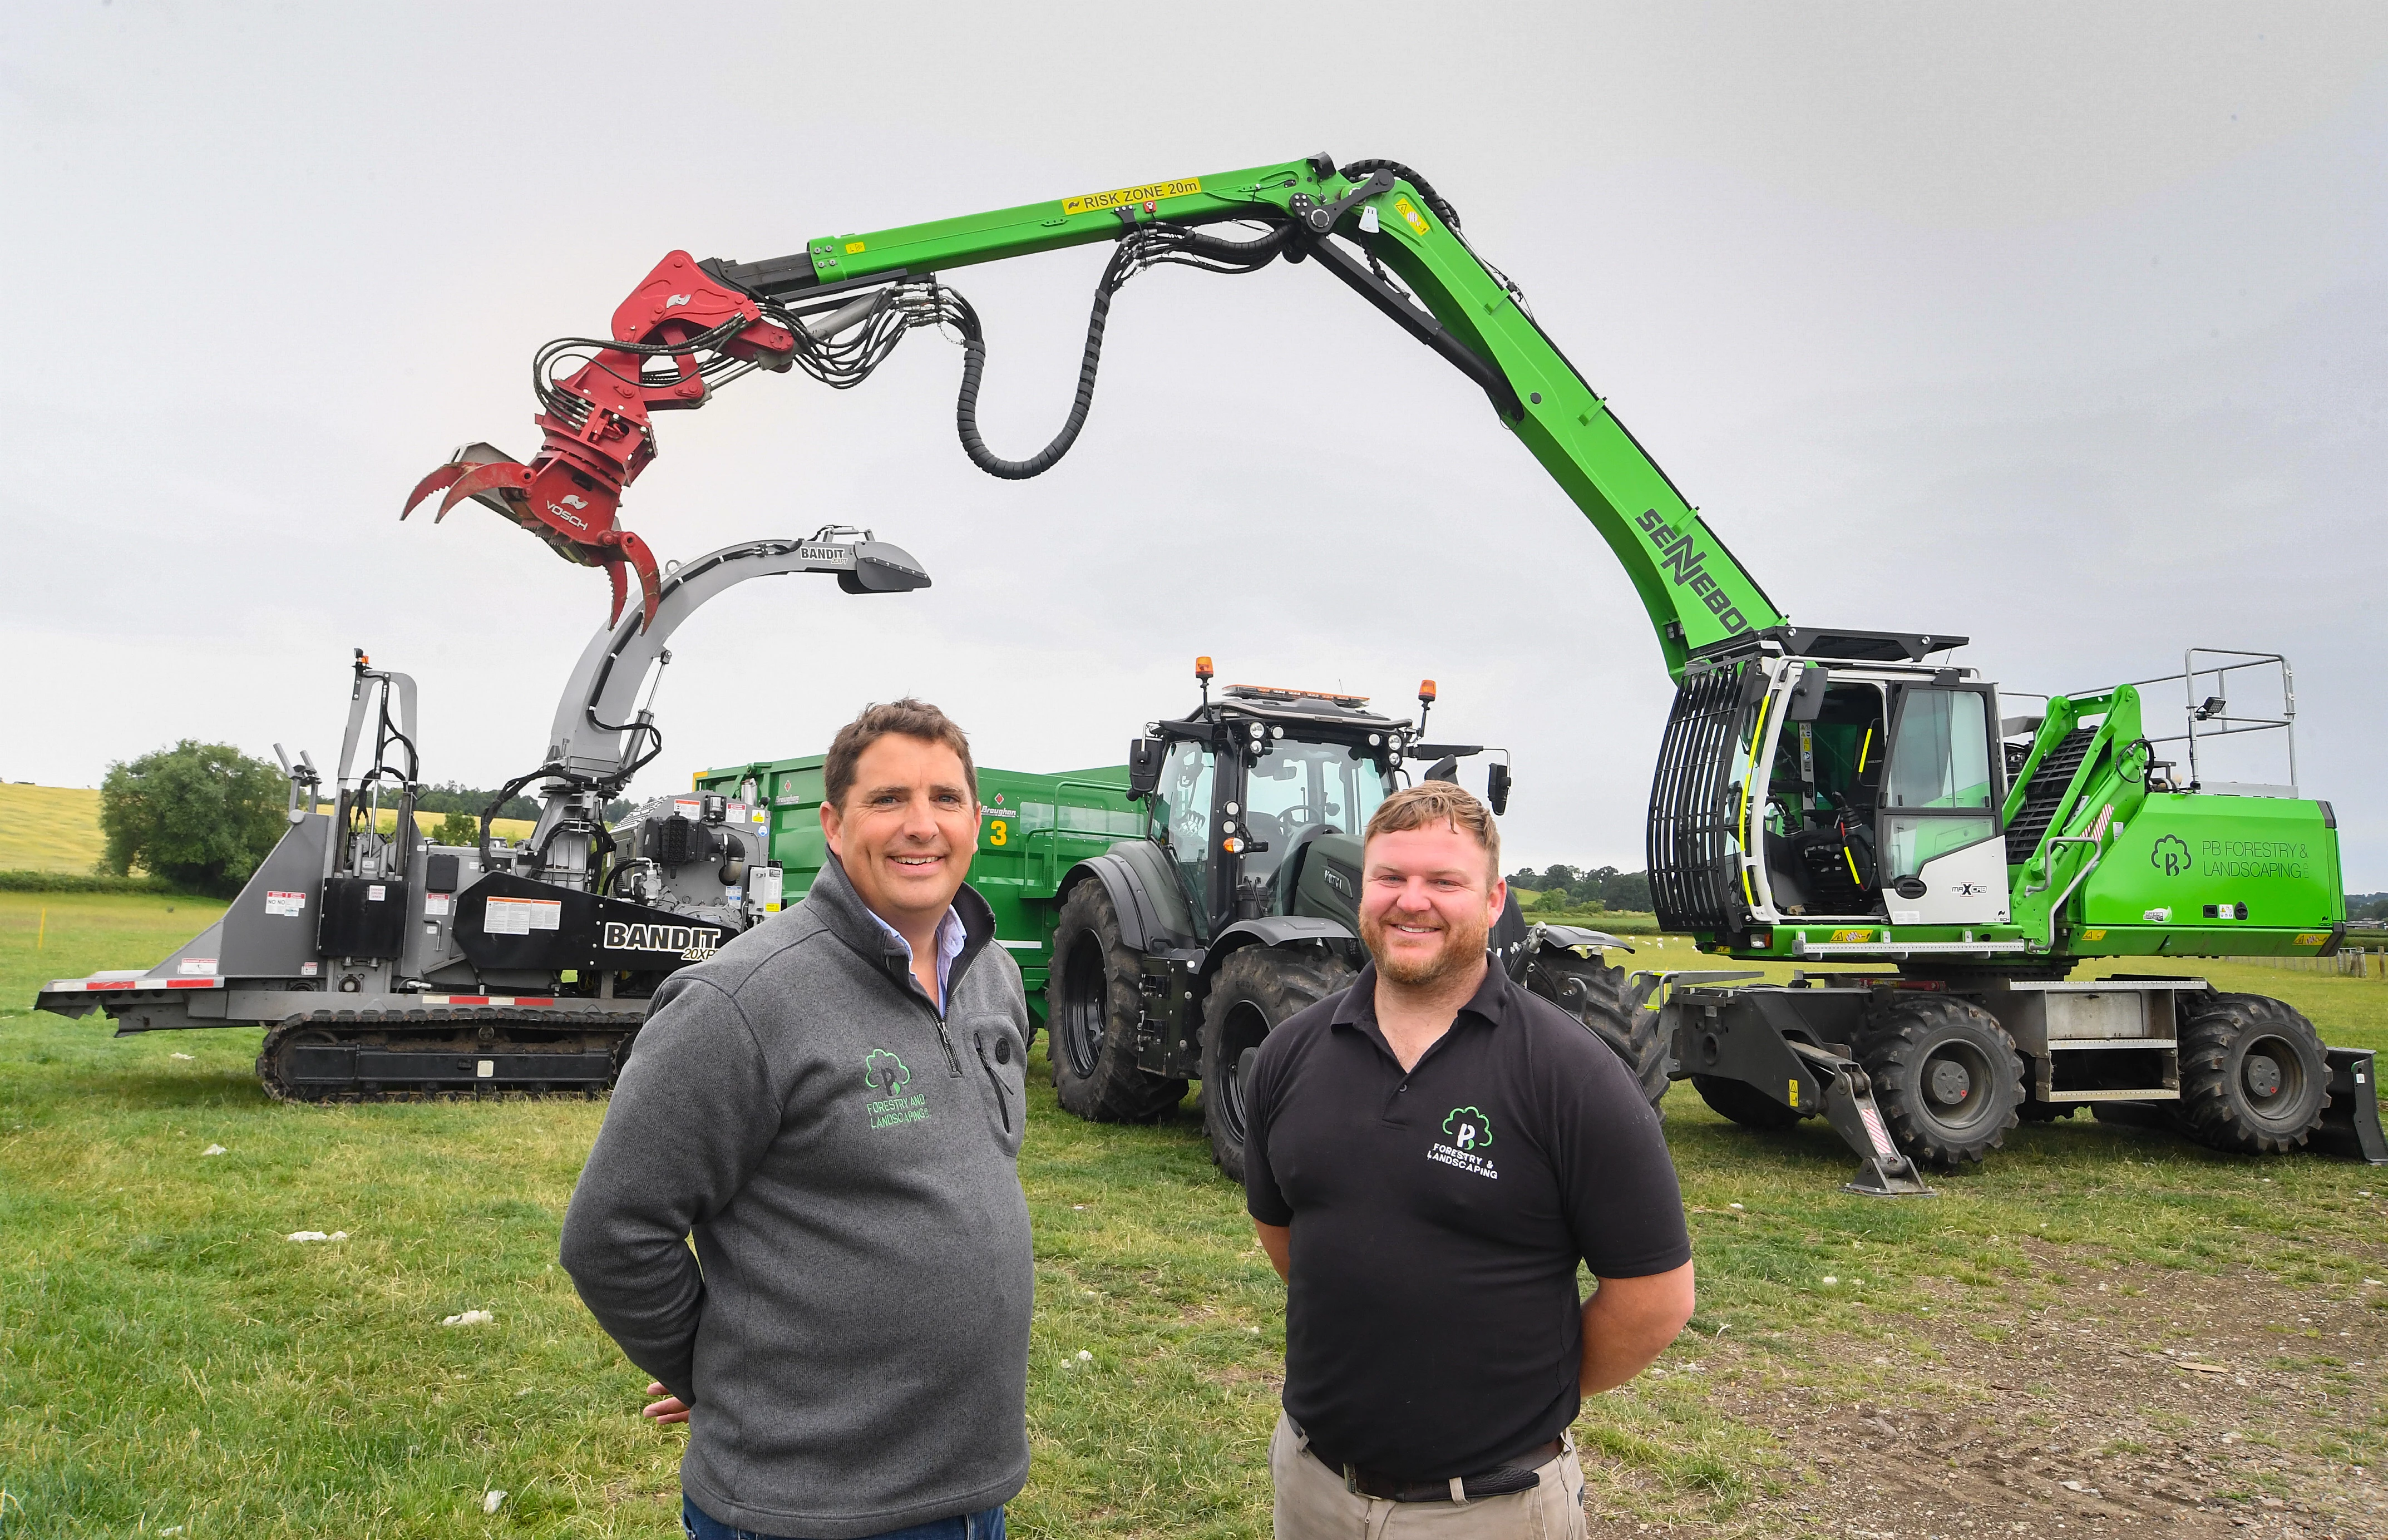 PB Forestry and Landscaping Managing Director Philip Bett with Senior Operative Terry Boneham and the new machinery.